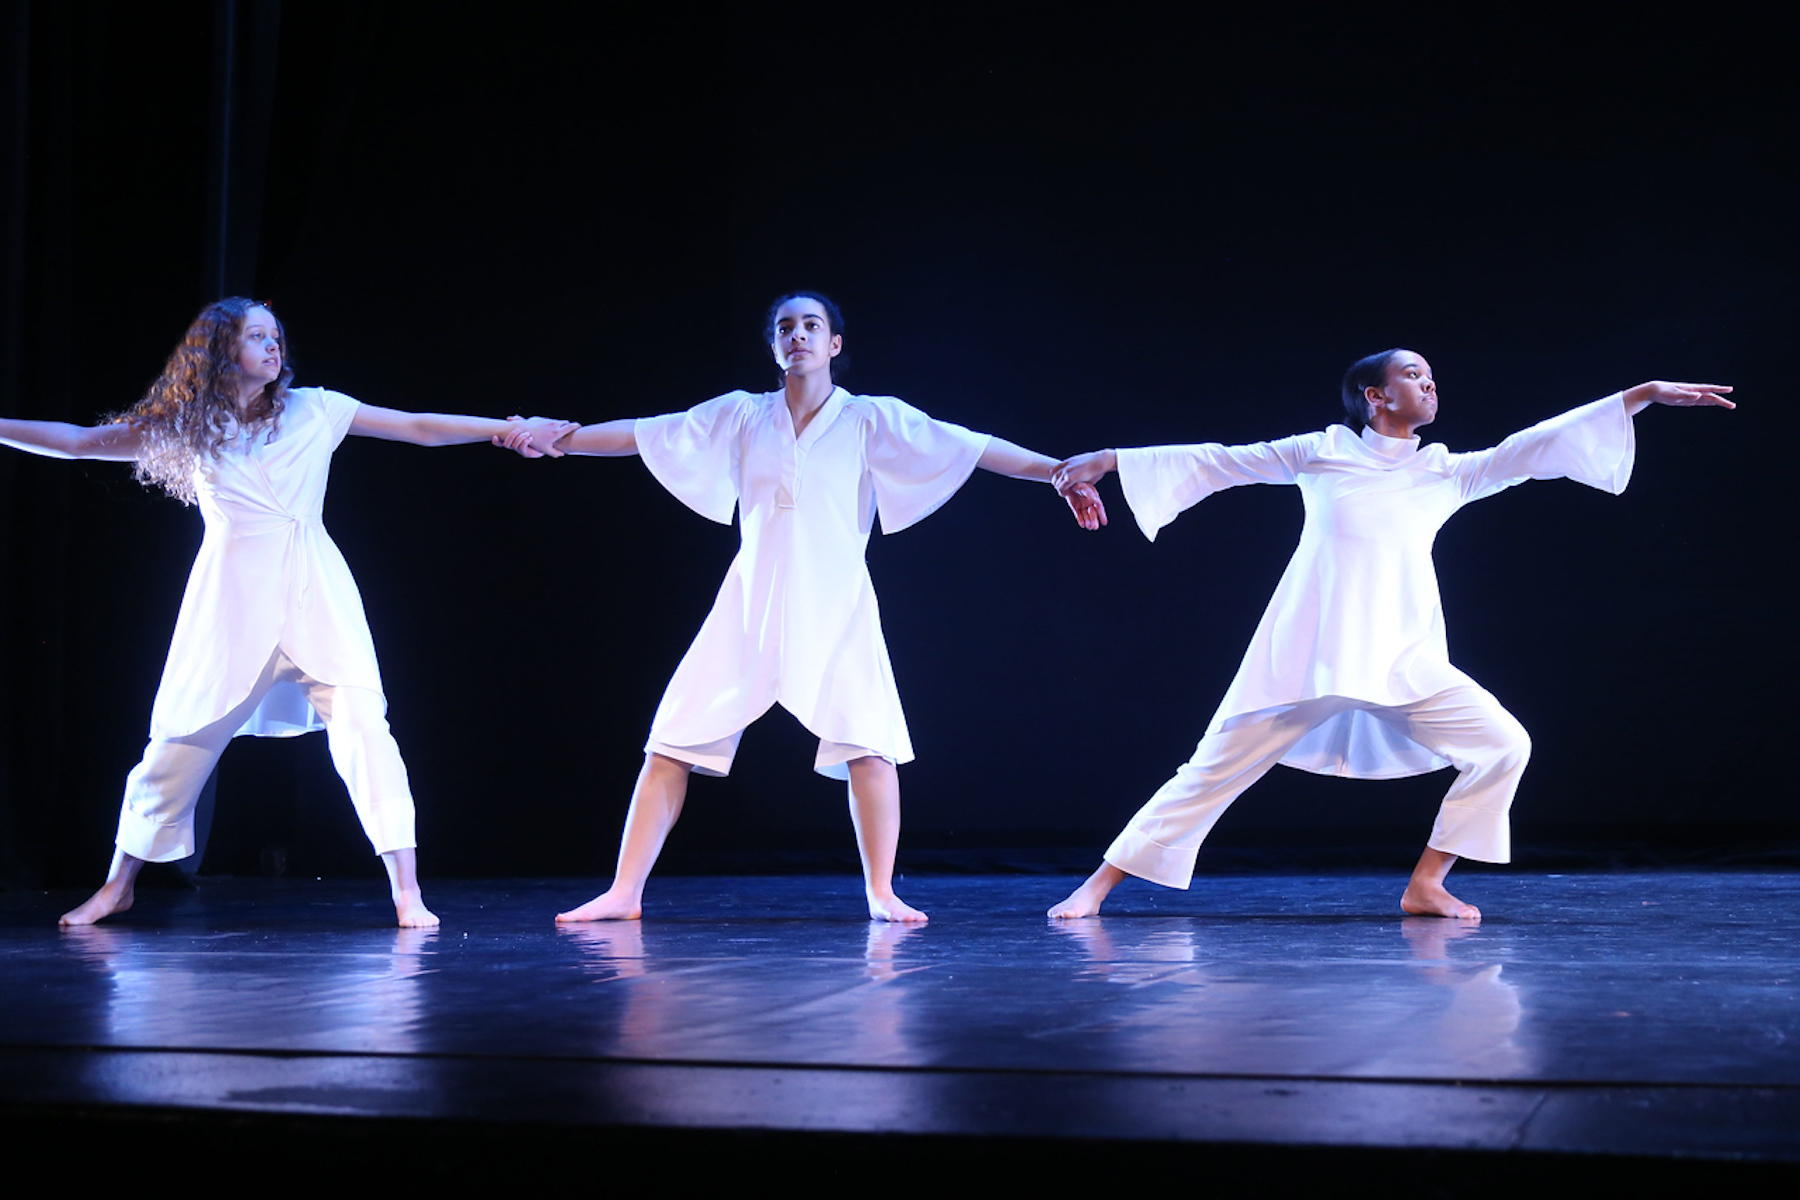 Three Fieldston Upper student dancers perform on stage, wearing all white and holding hands.